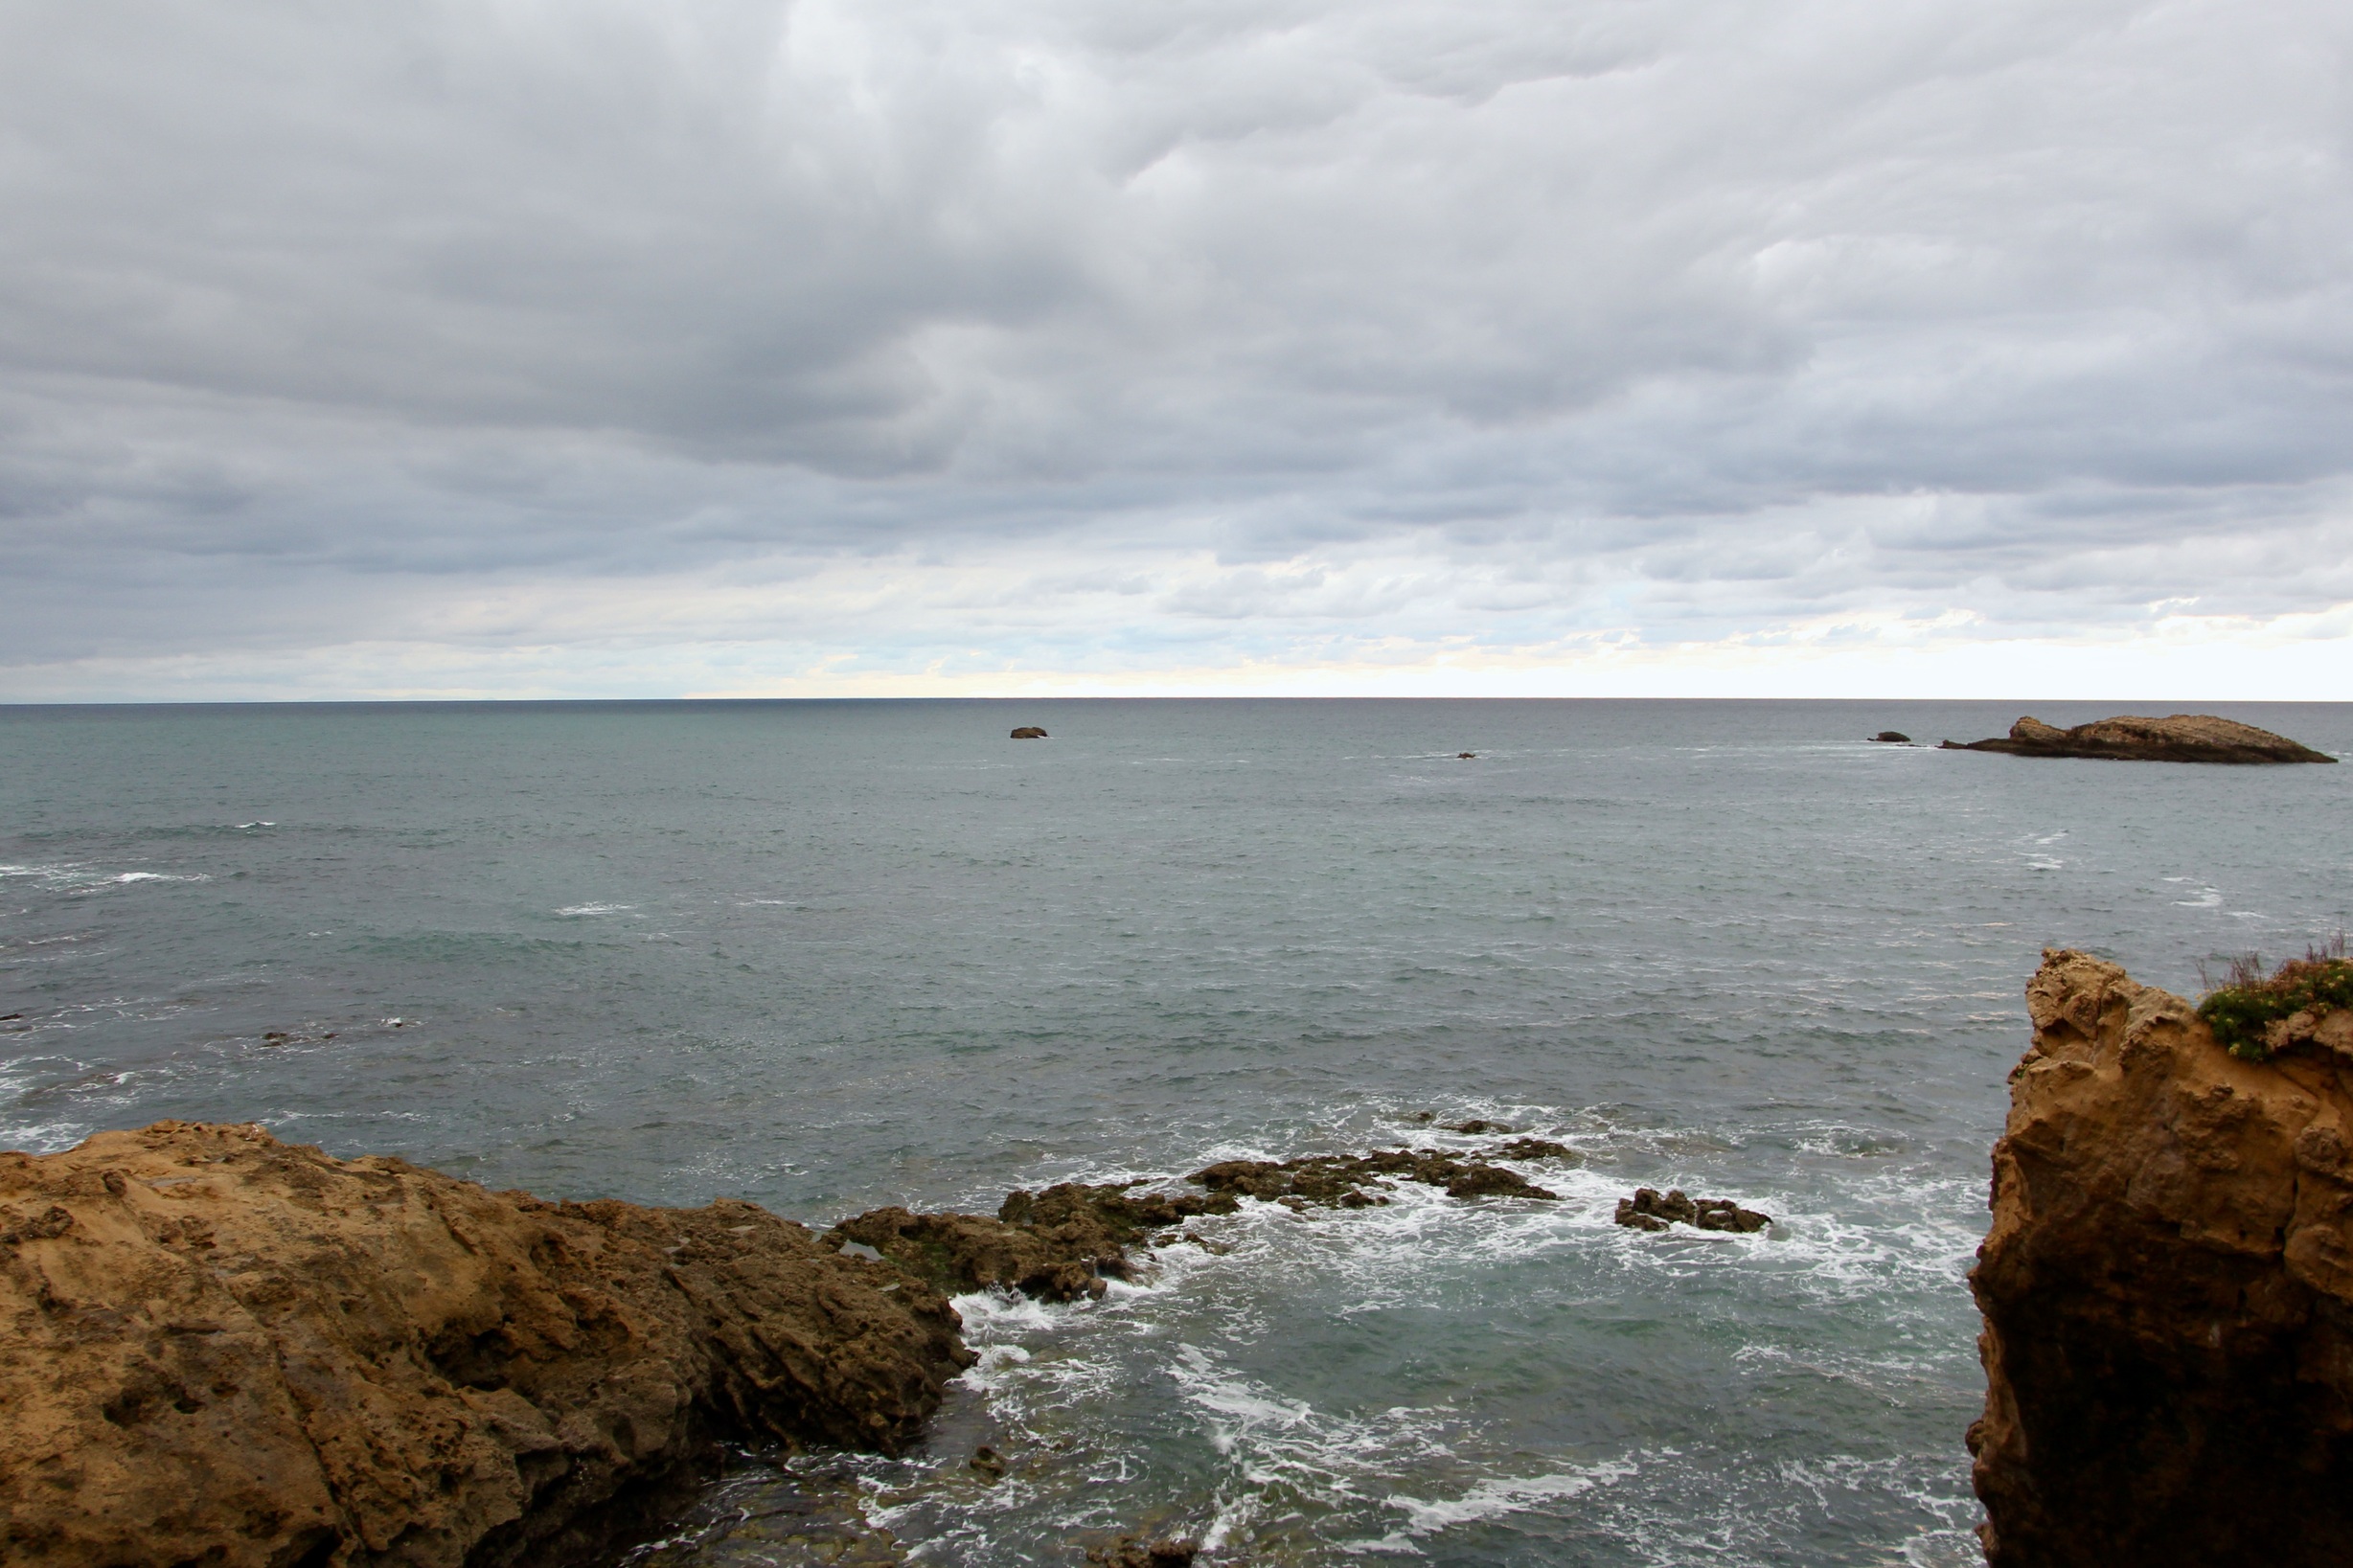 A view of the sea with an overcast sky in Biarritz, France.